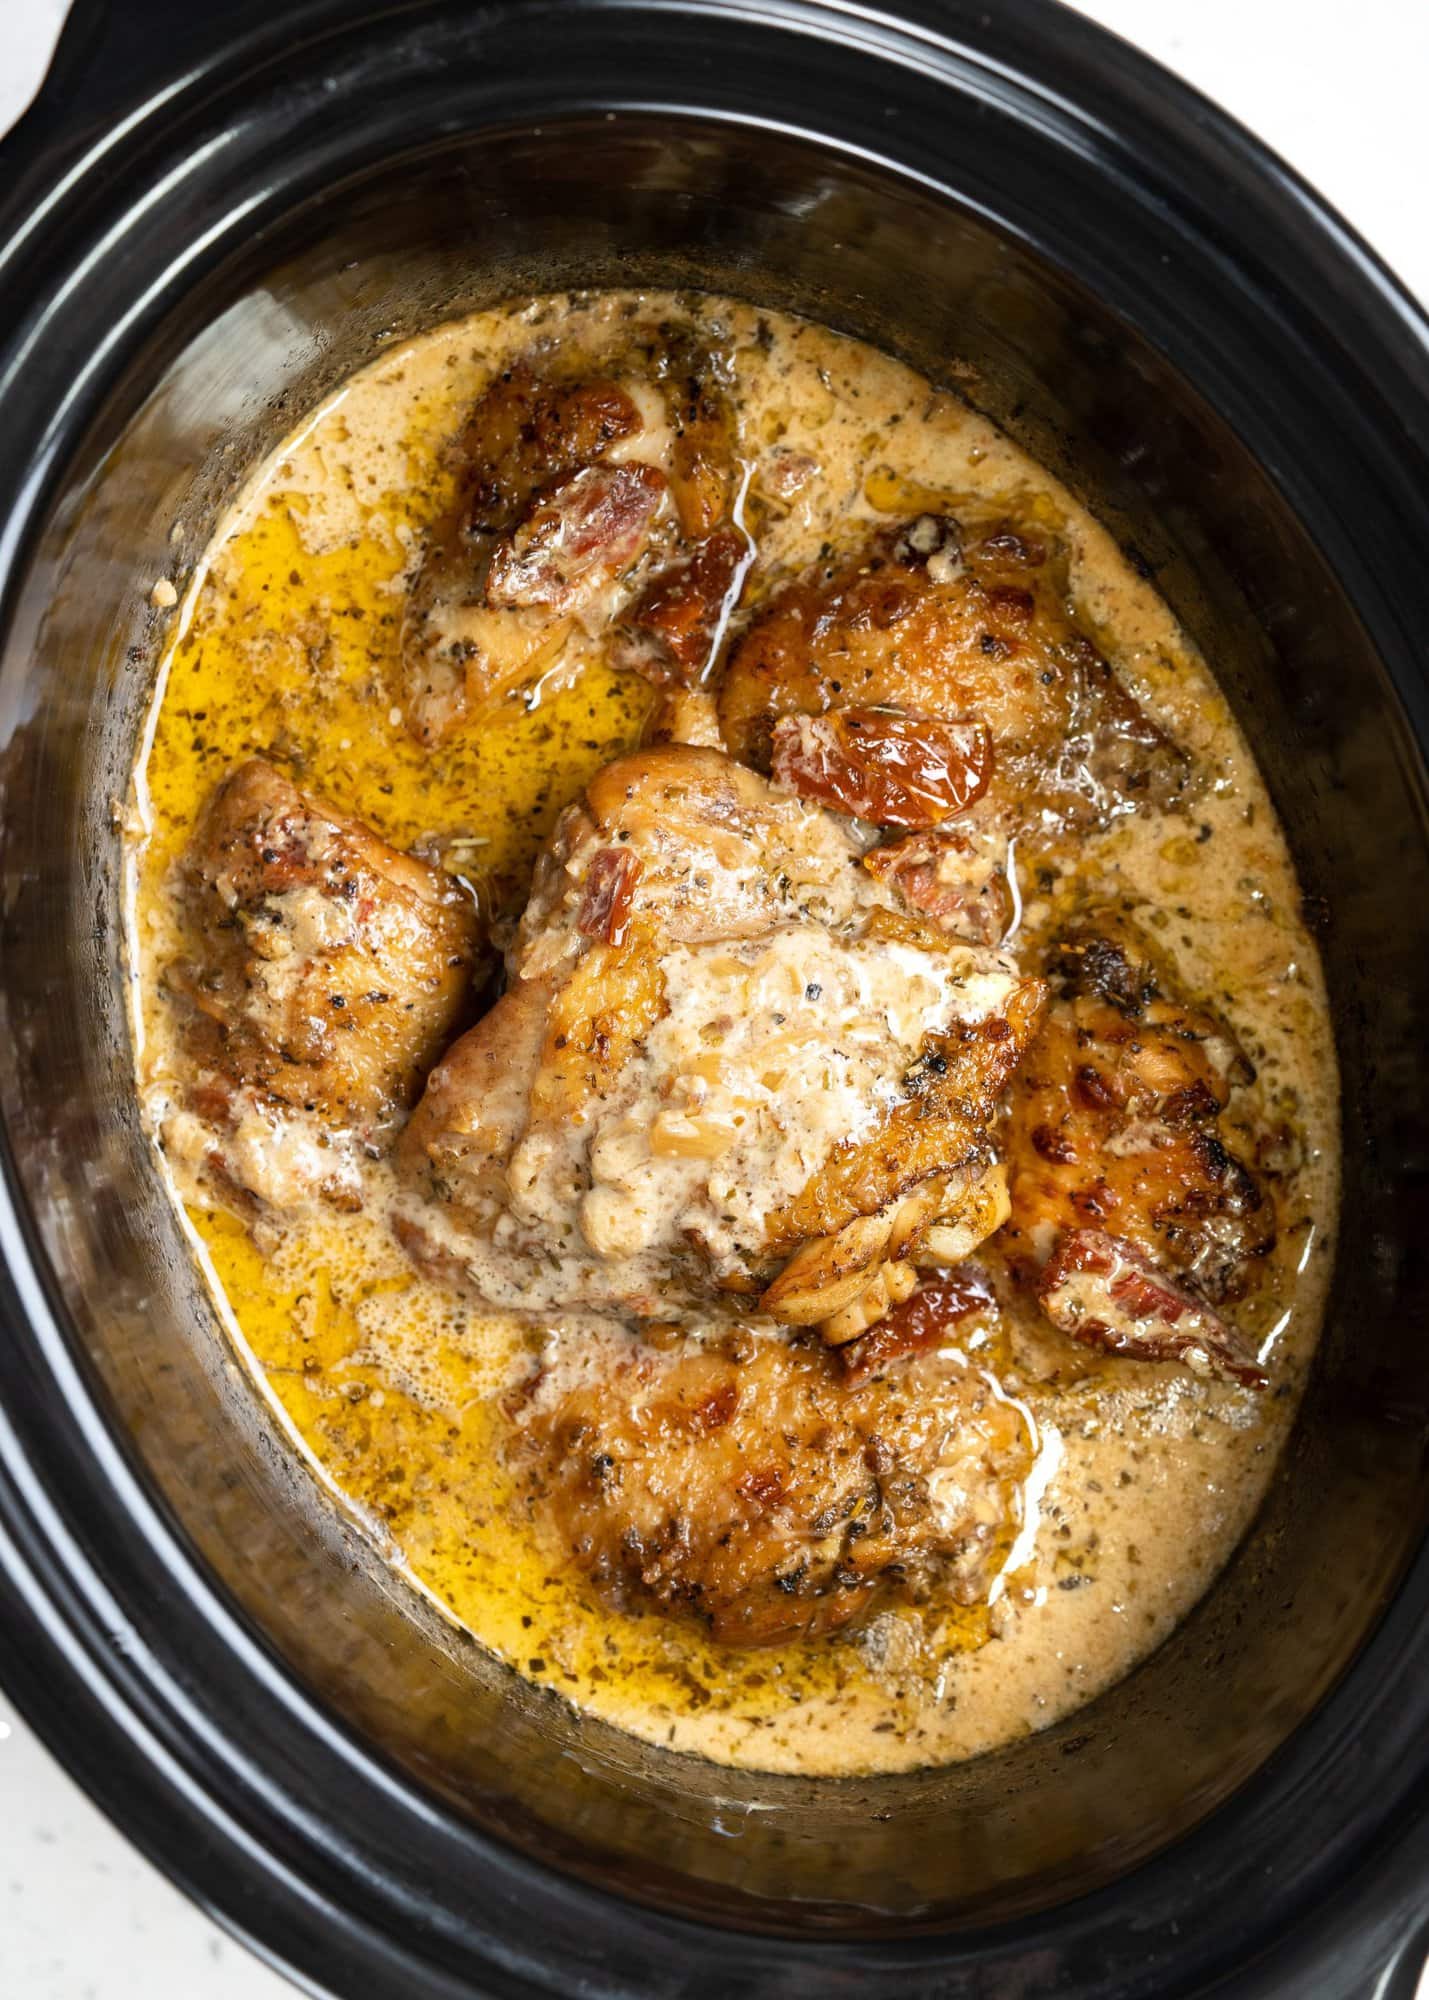 Seared crispy chicken thighs in a sun-dried tomato sauce, made in a slow cooker.